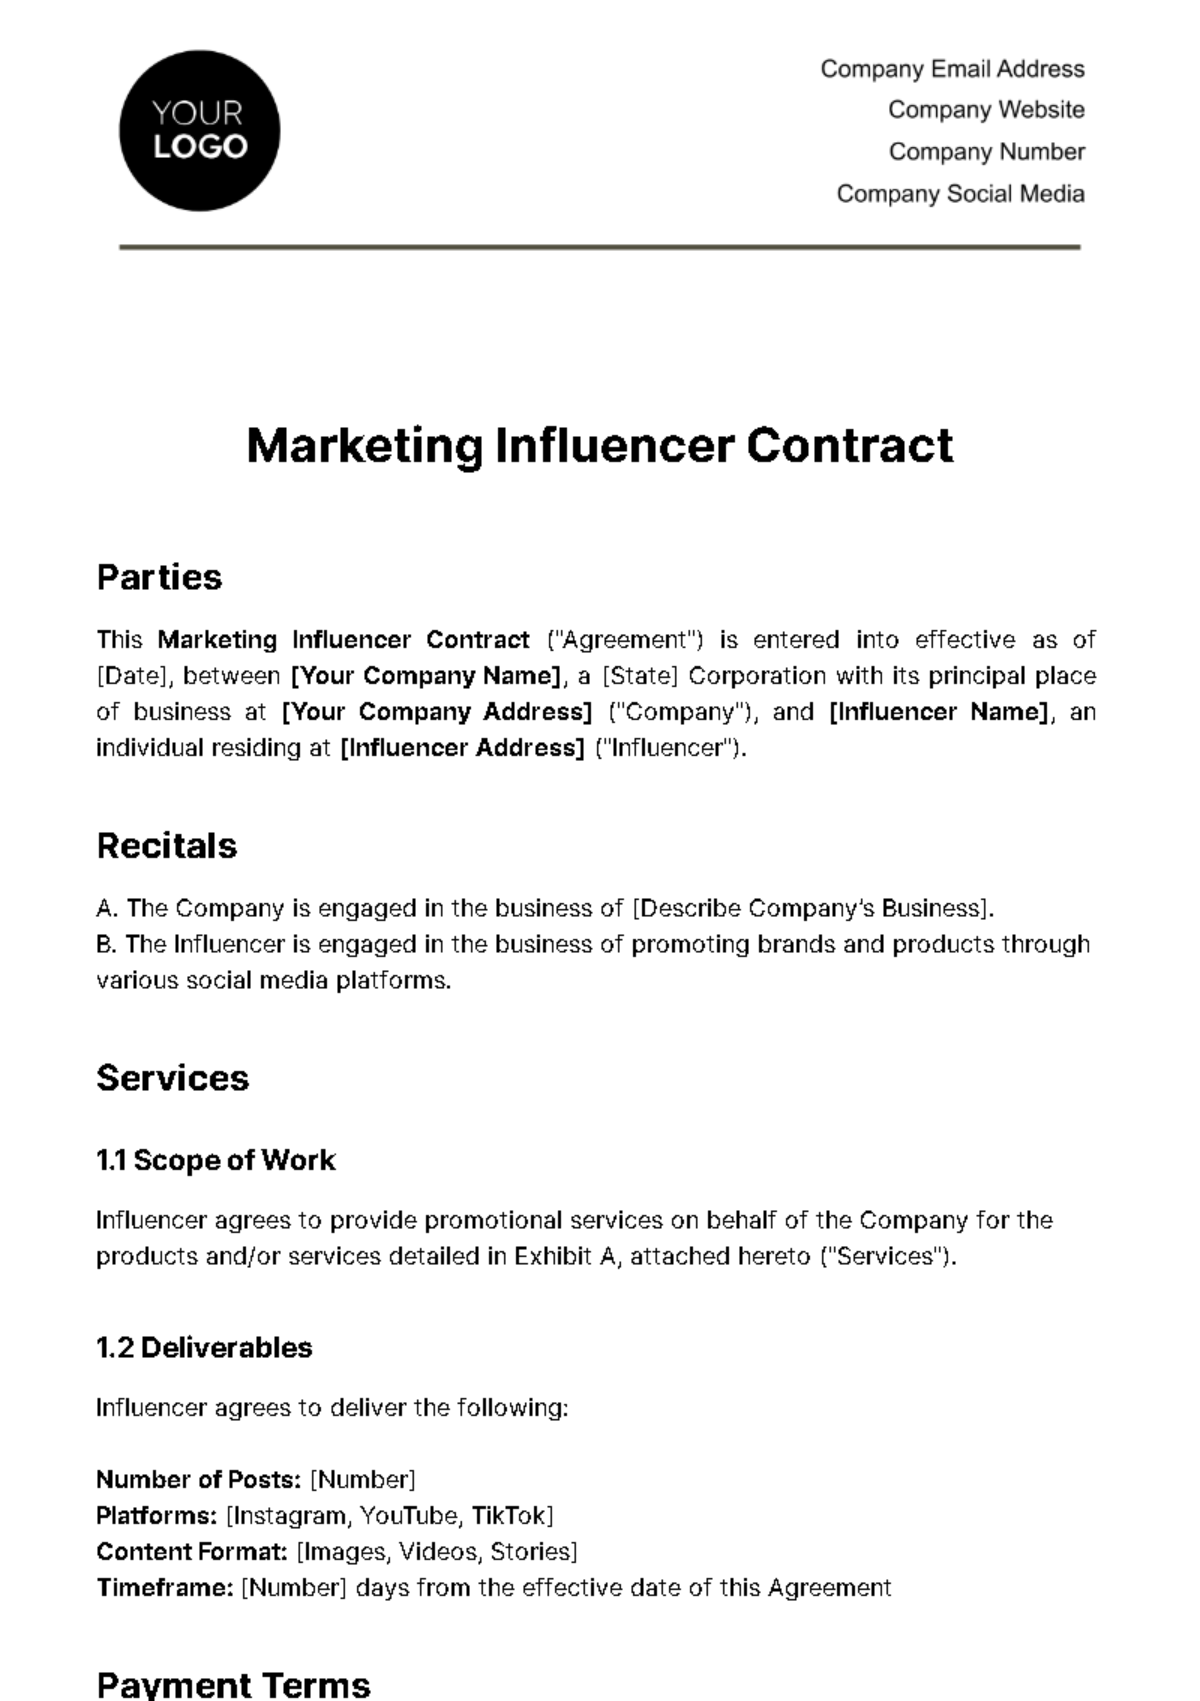 Free Marketing Influencer Contract Template